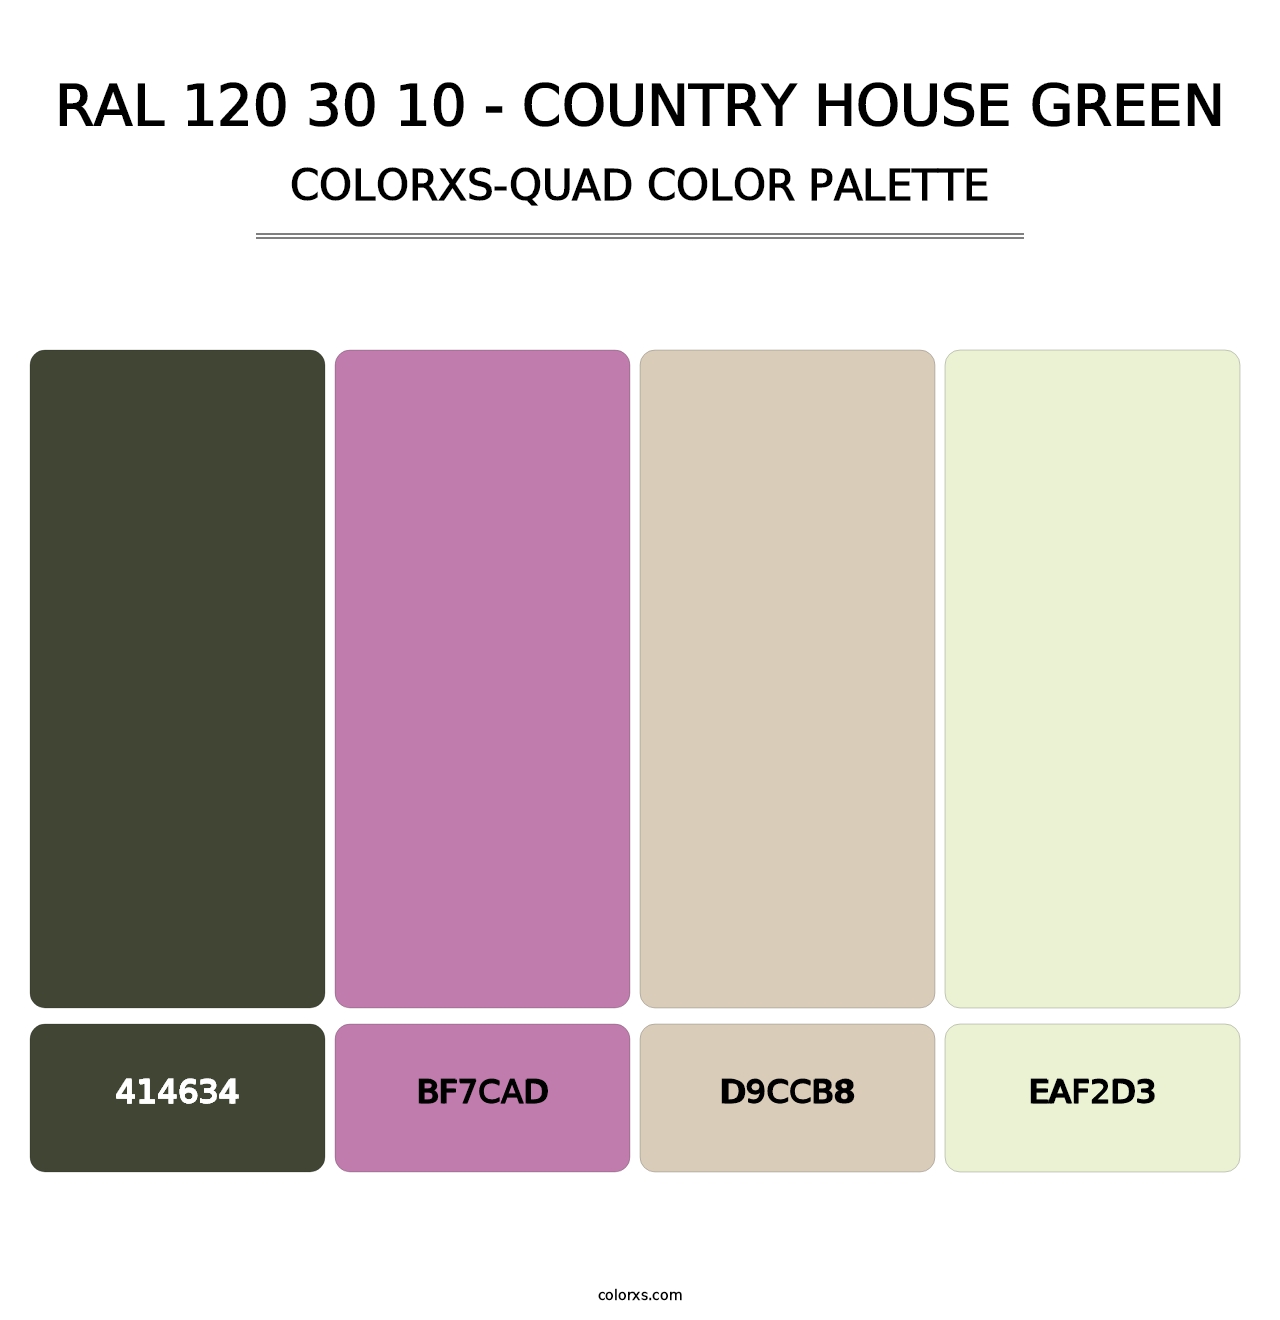 RAL 120 30 10 - Country House Green - Colorxs Quad Palette